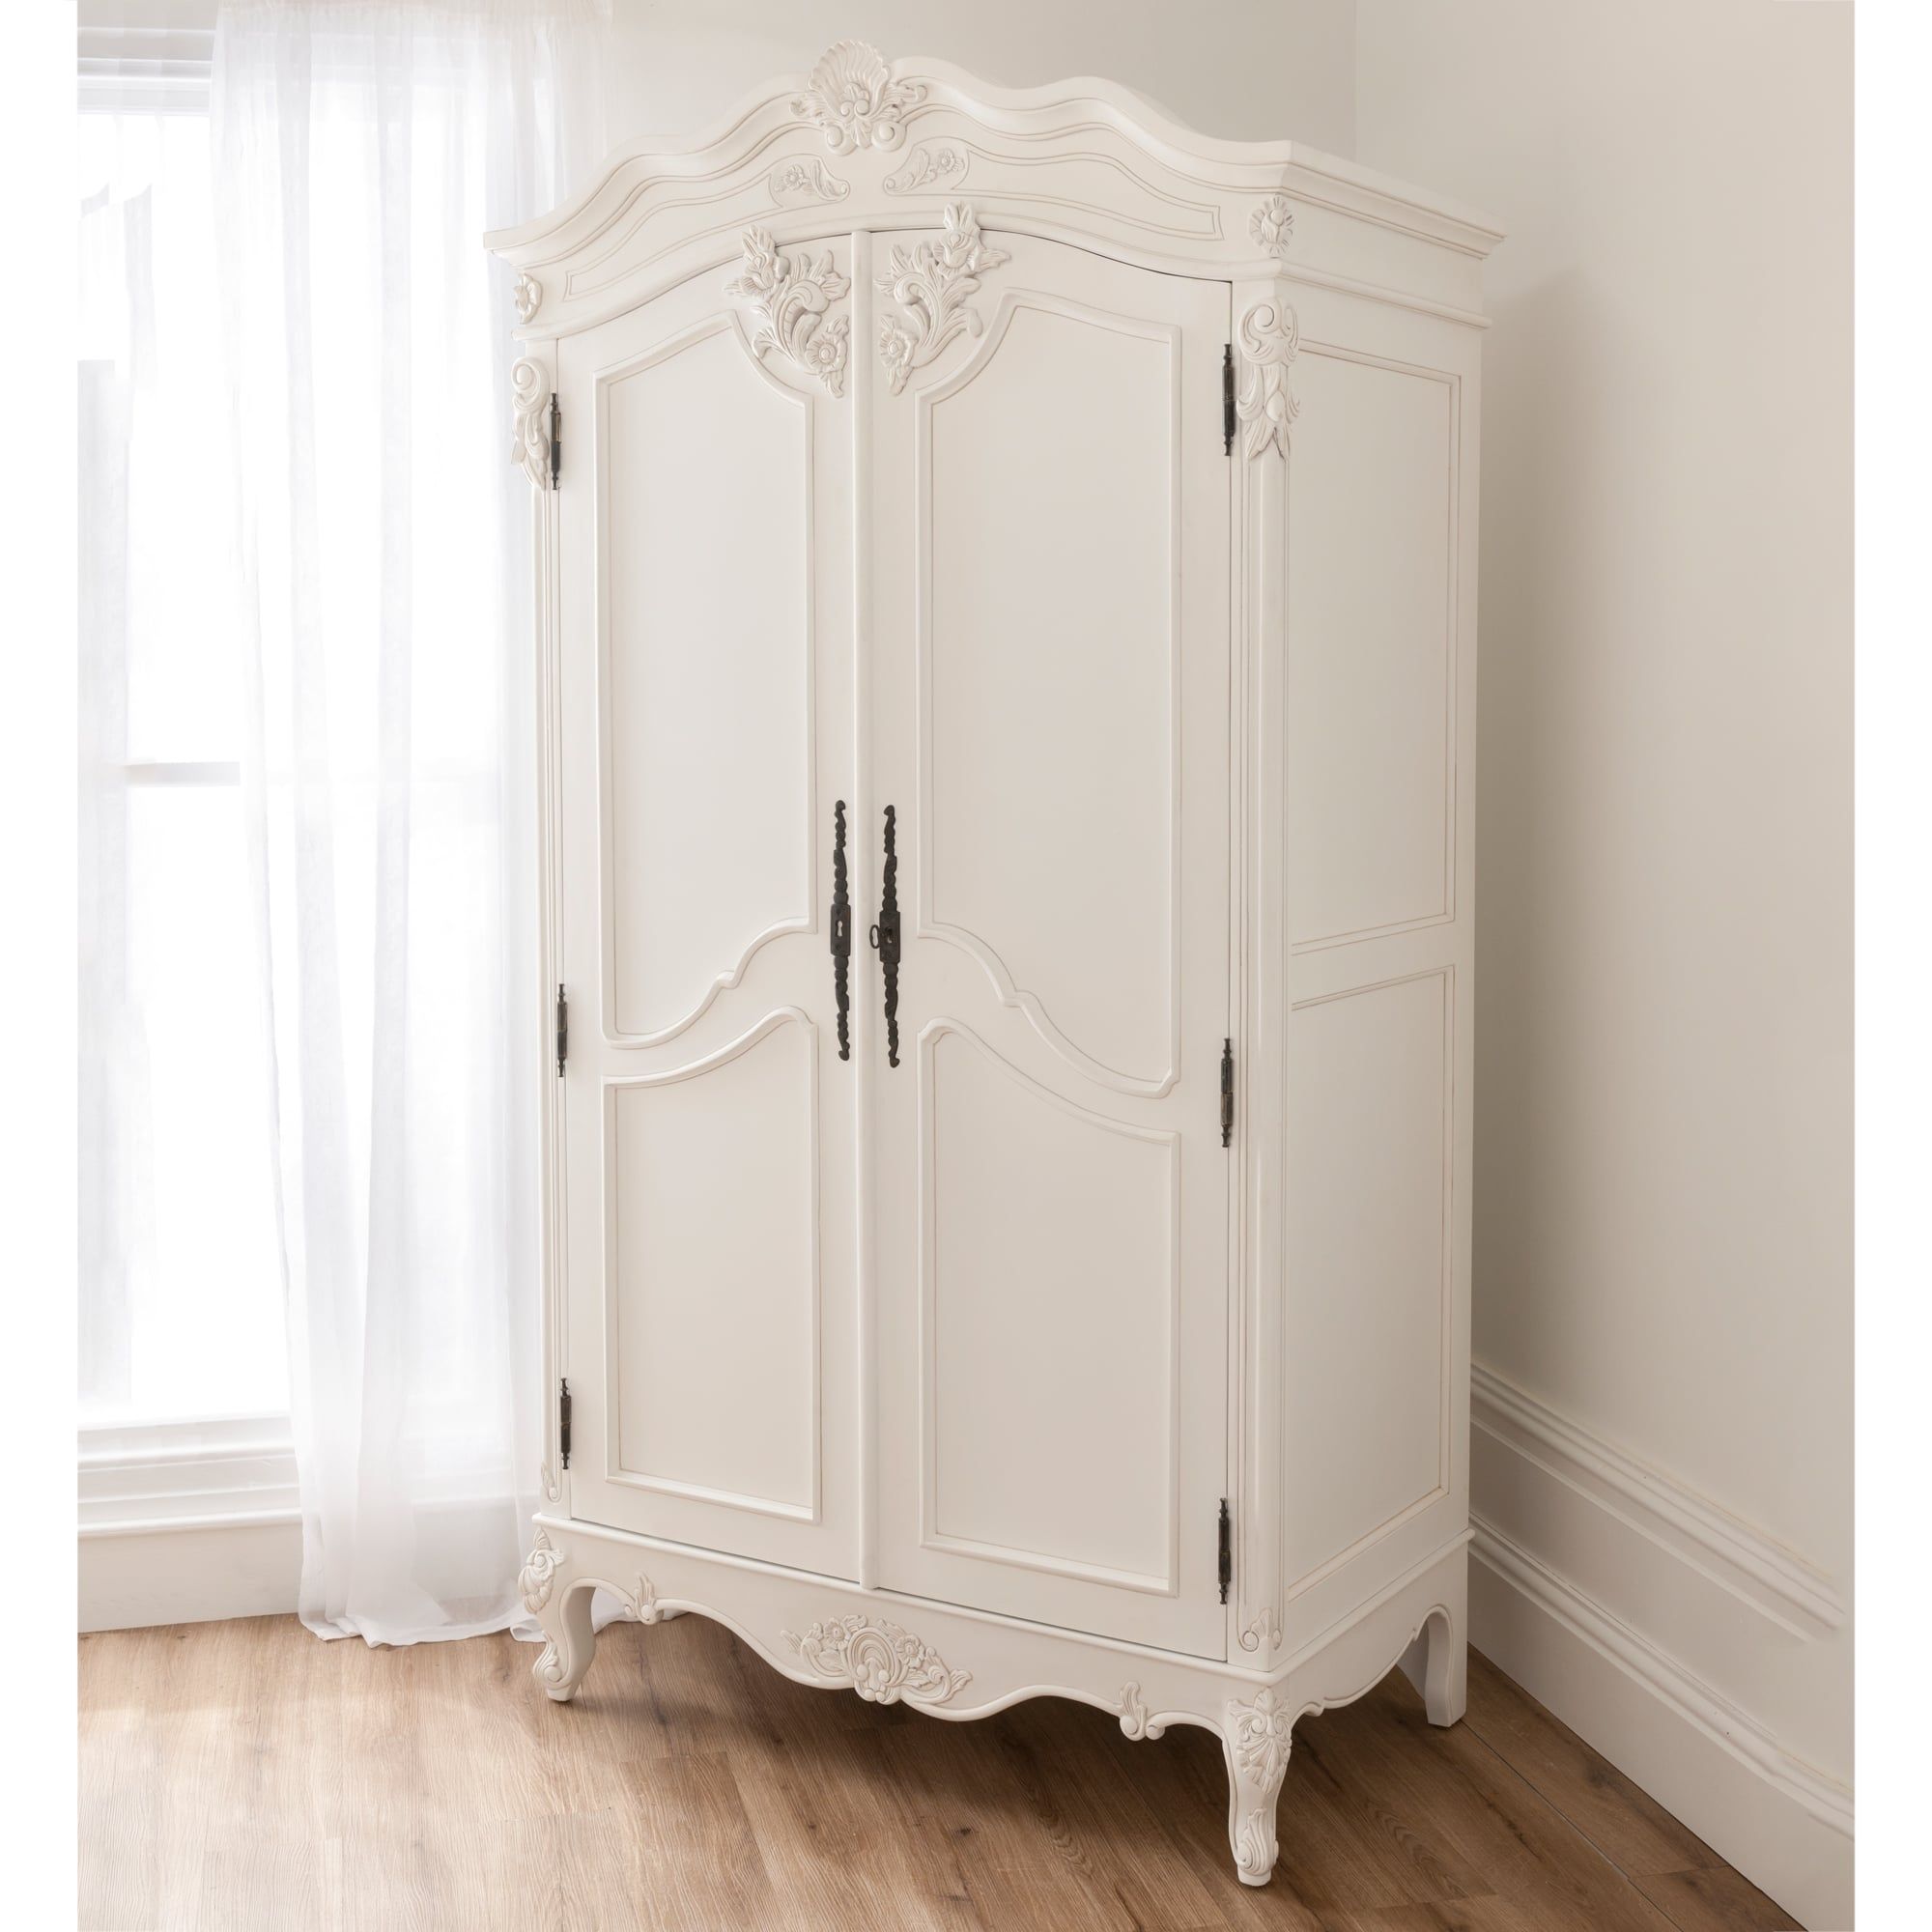 Baroque Antique French Wardrobe Is Available Online At Homesdirect365 Intended For French Style Wardrobes (View 9 of 15)